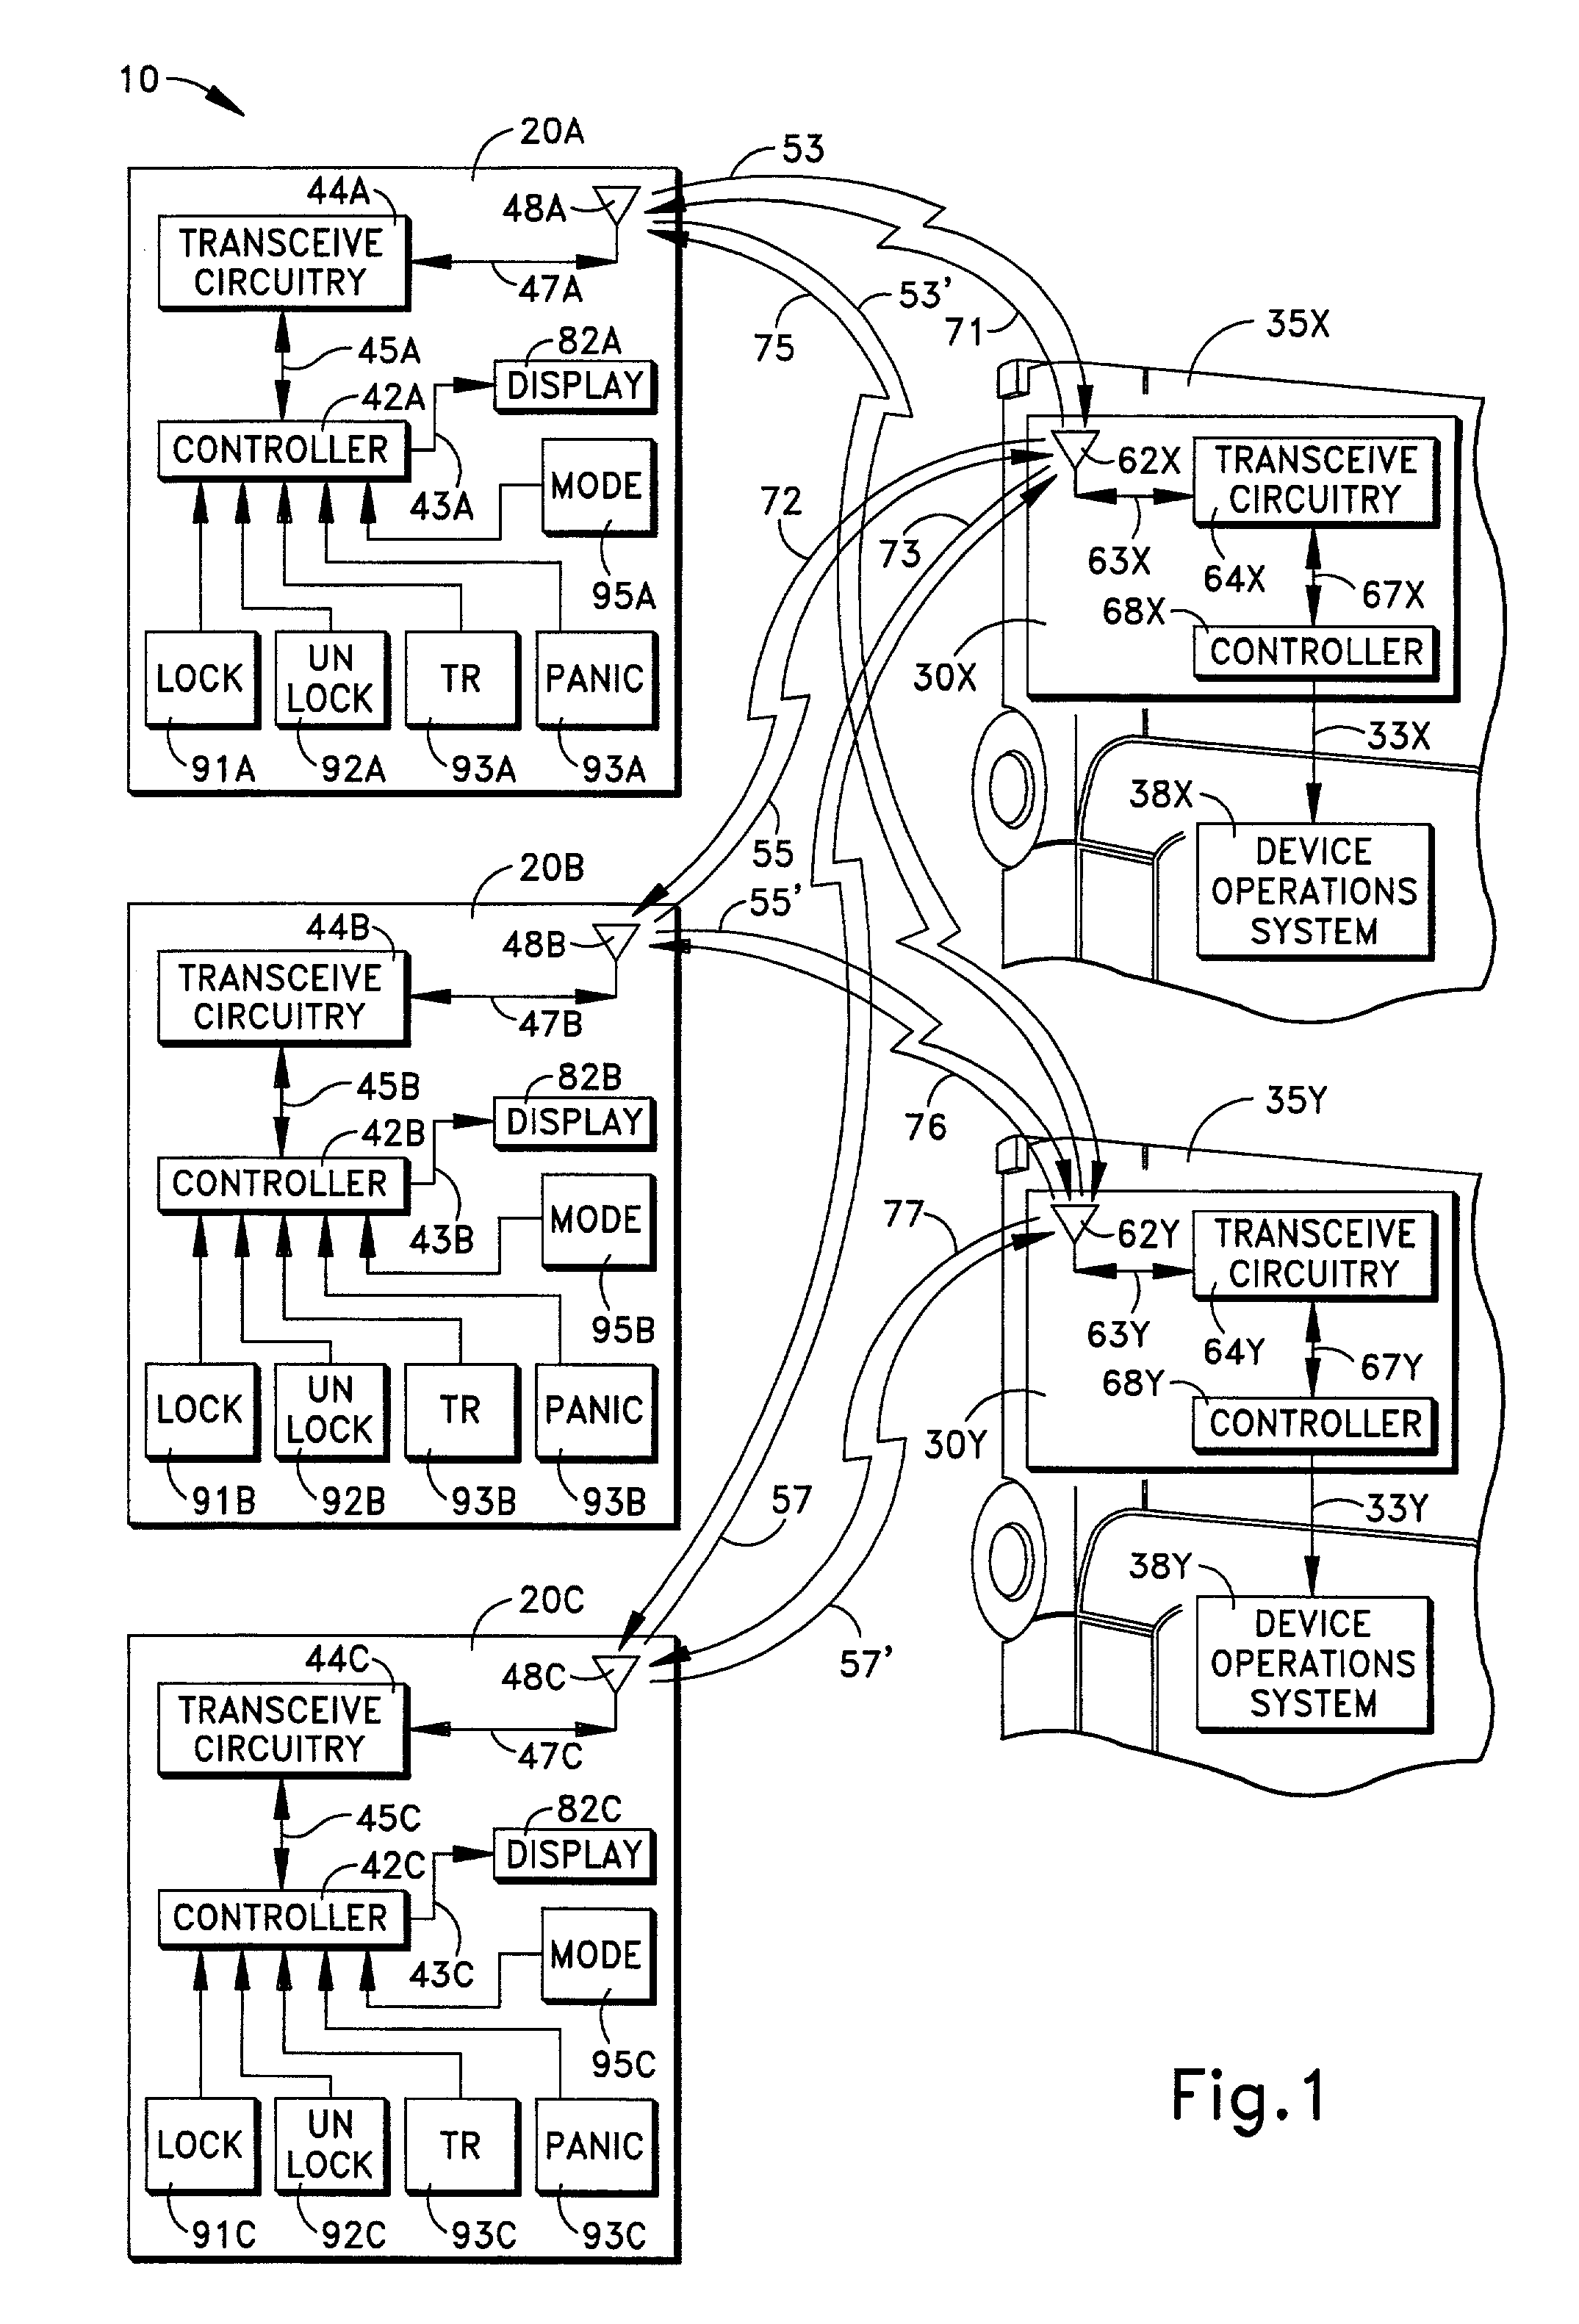 Configurable arrangement of multiple transmitters and multiple receivers for the performance of remote convenience functions